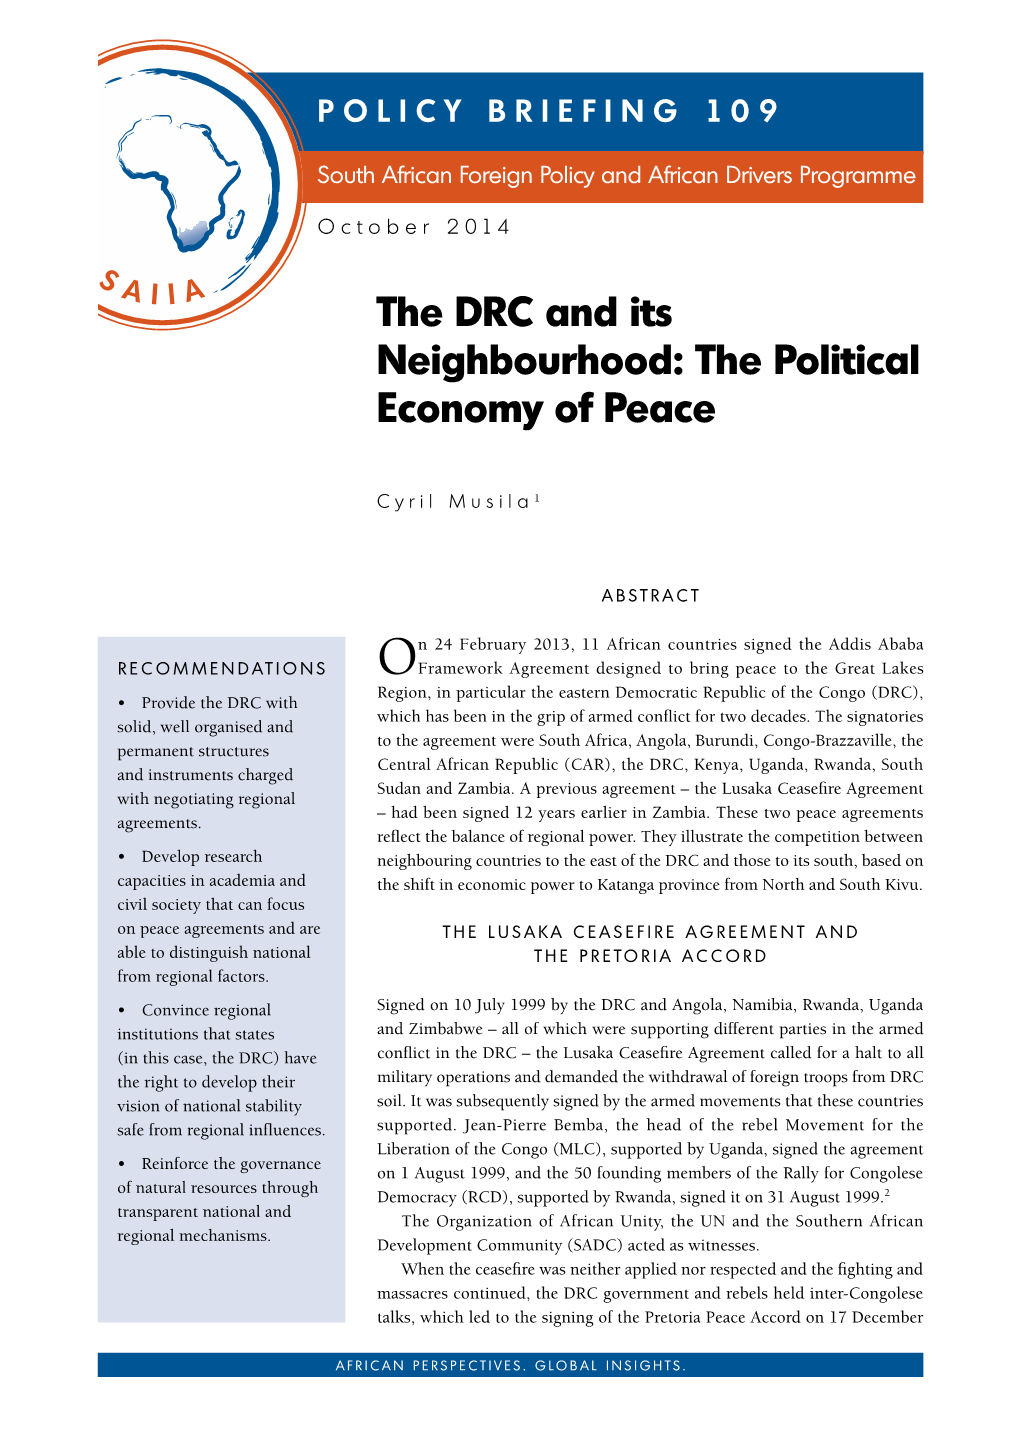 The DRC and Its Neighbourhood: the Political Economy of Peace